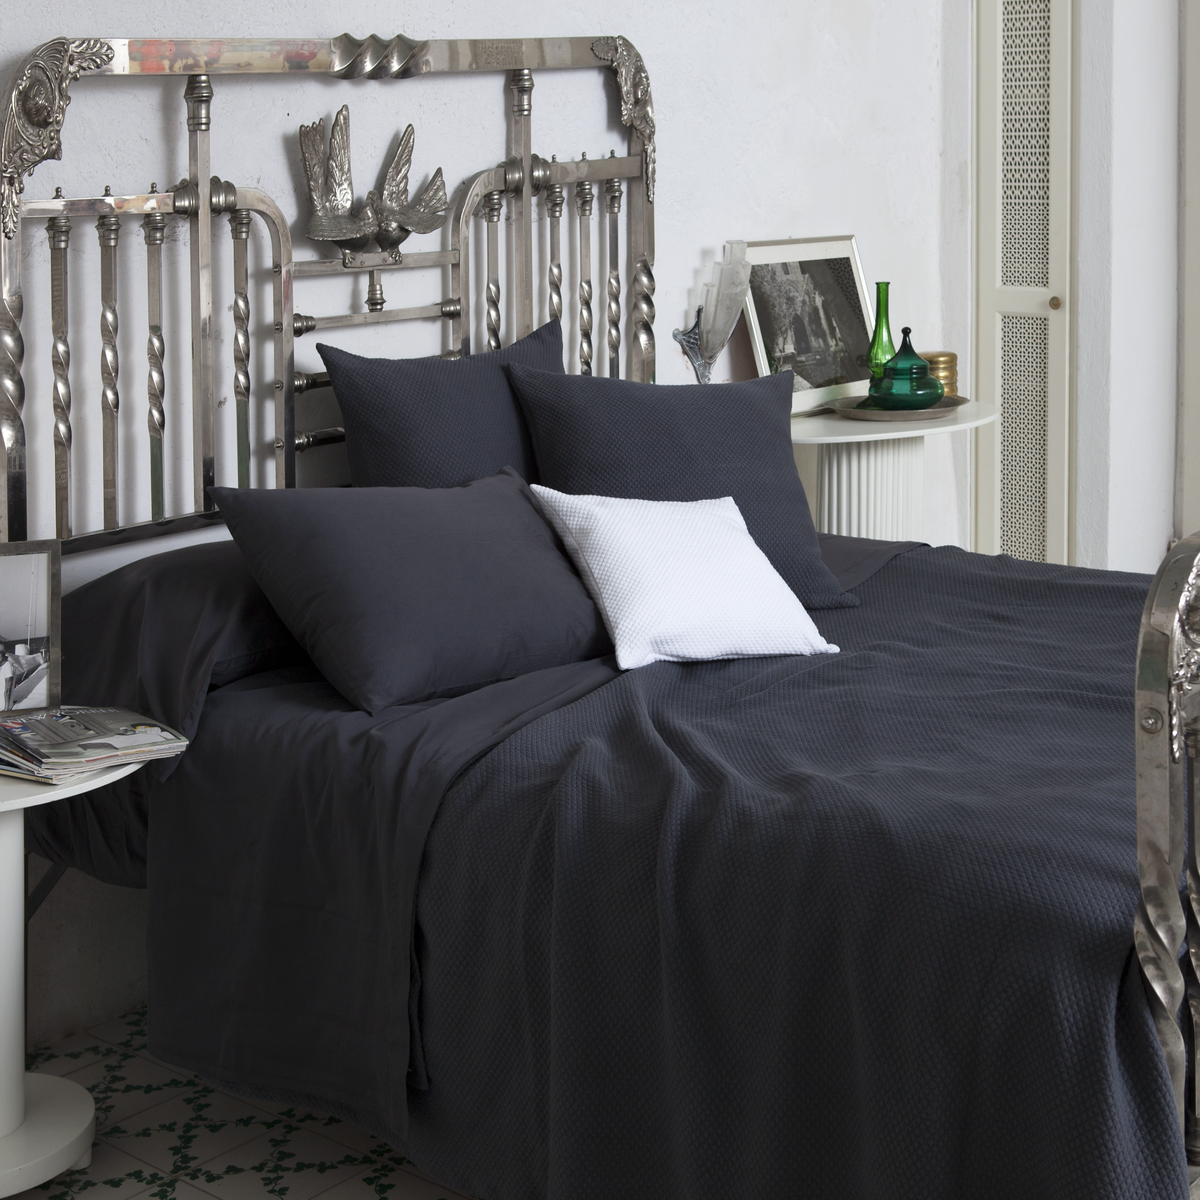 Lifestyle Image of Charcoal Signoria Olivia Coverlet and Shams on a Bed in a Room